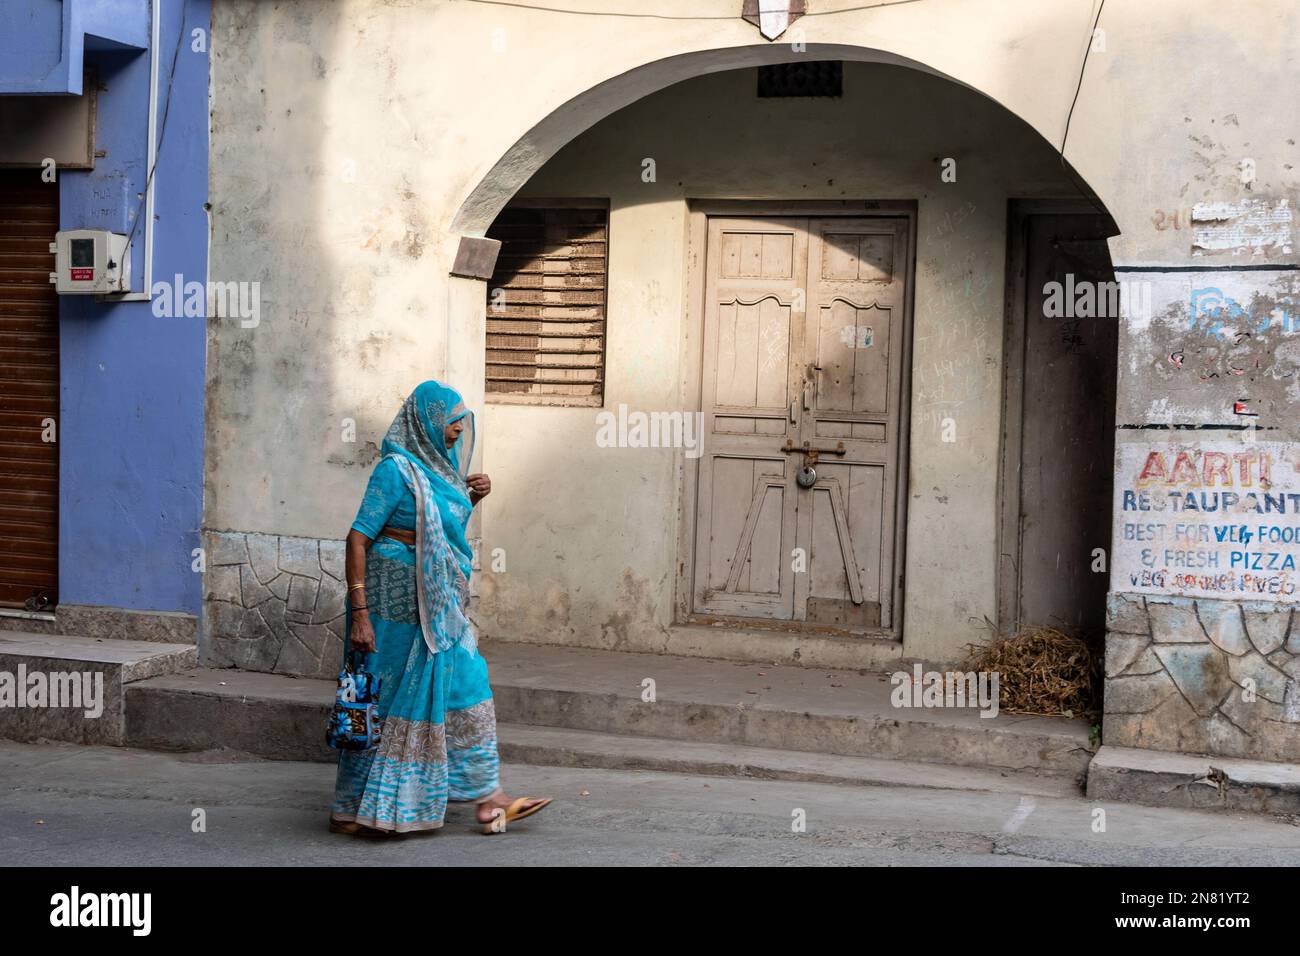 Diu, India - December 2018: An Indian woman wearing a bright blue sari walking past a vintage arched doorway in the island town of Diu. Stock Photo